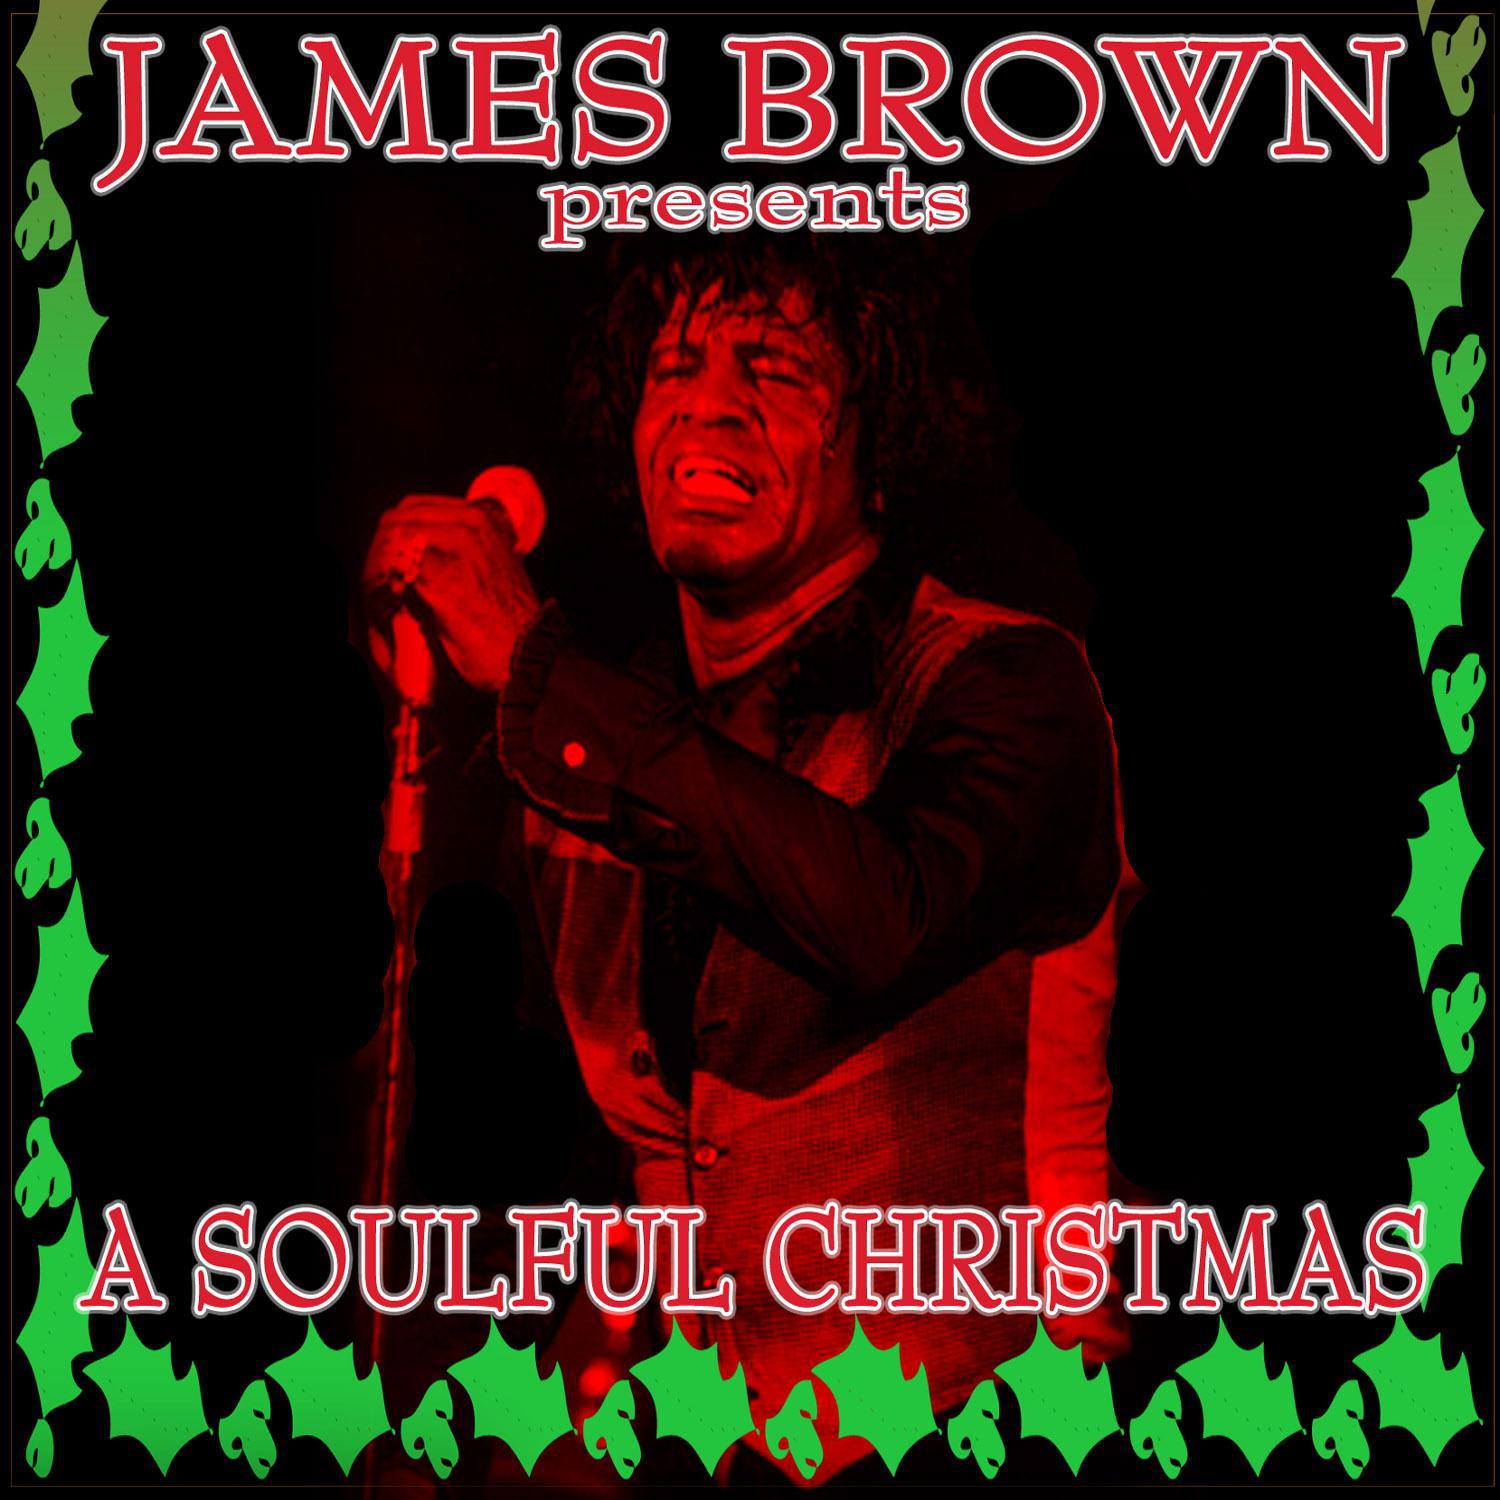 James Brown Presents A Soulful Christmas